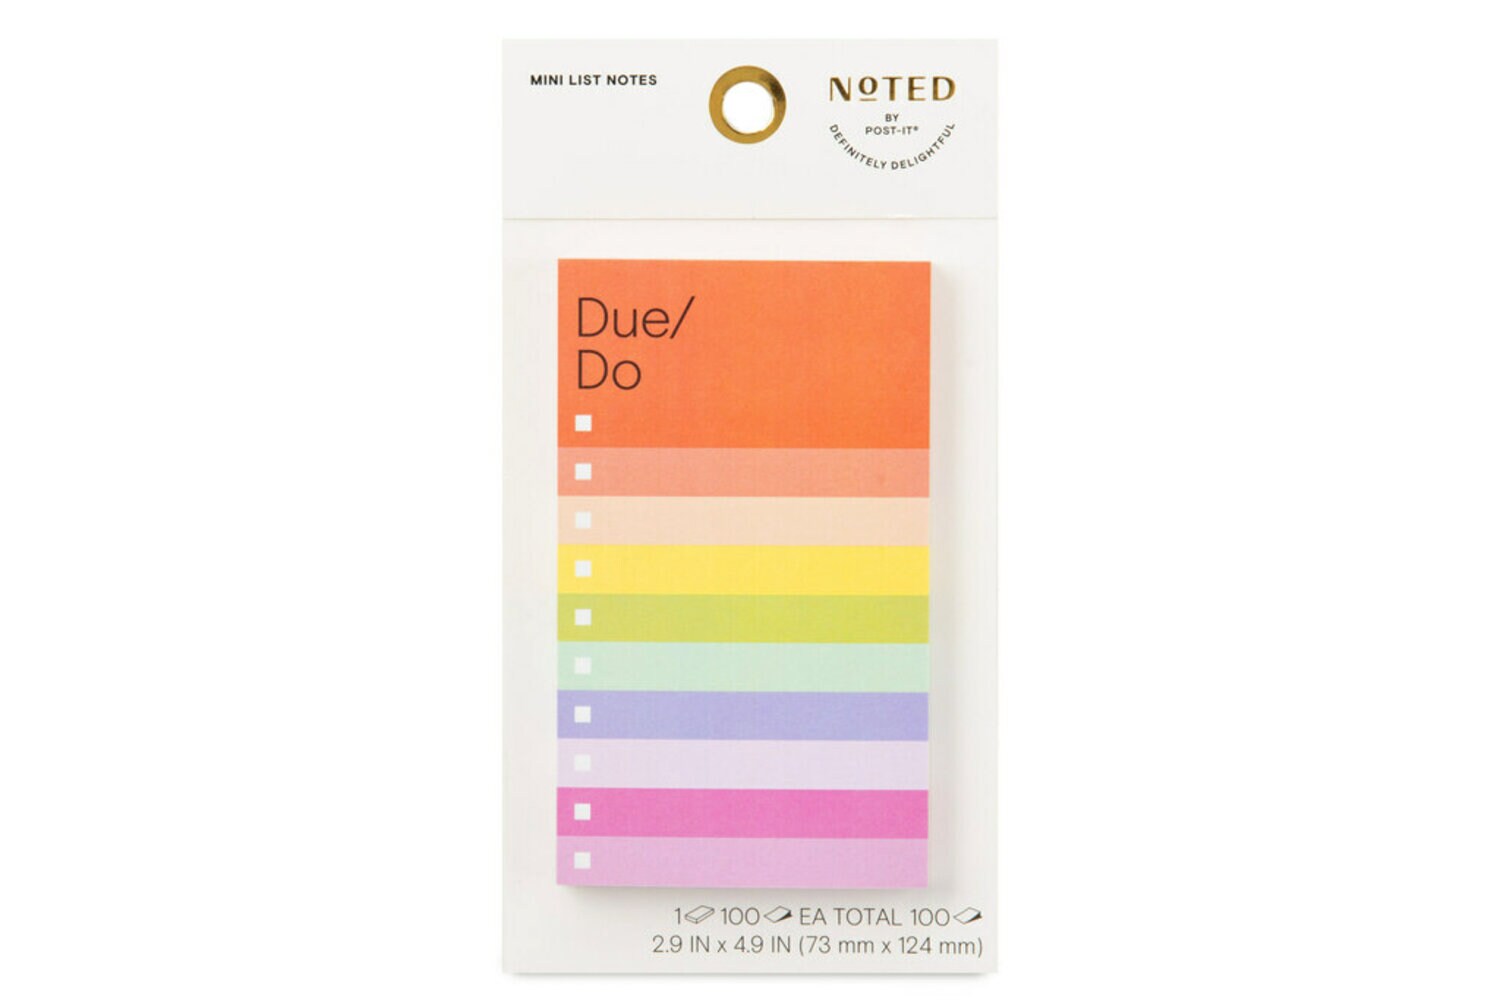 Post-it Tabs, 2 in, Solid, Assorted Colors, 6 Tabs/Color, 5 Colors, 30  Tabs/Pack (686-ROYGB)